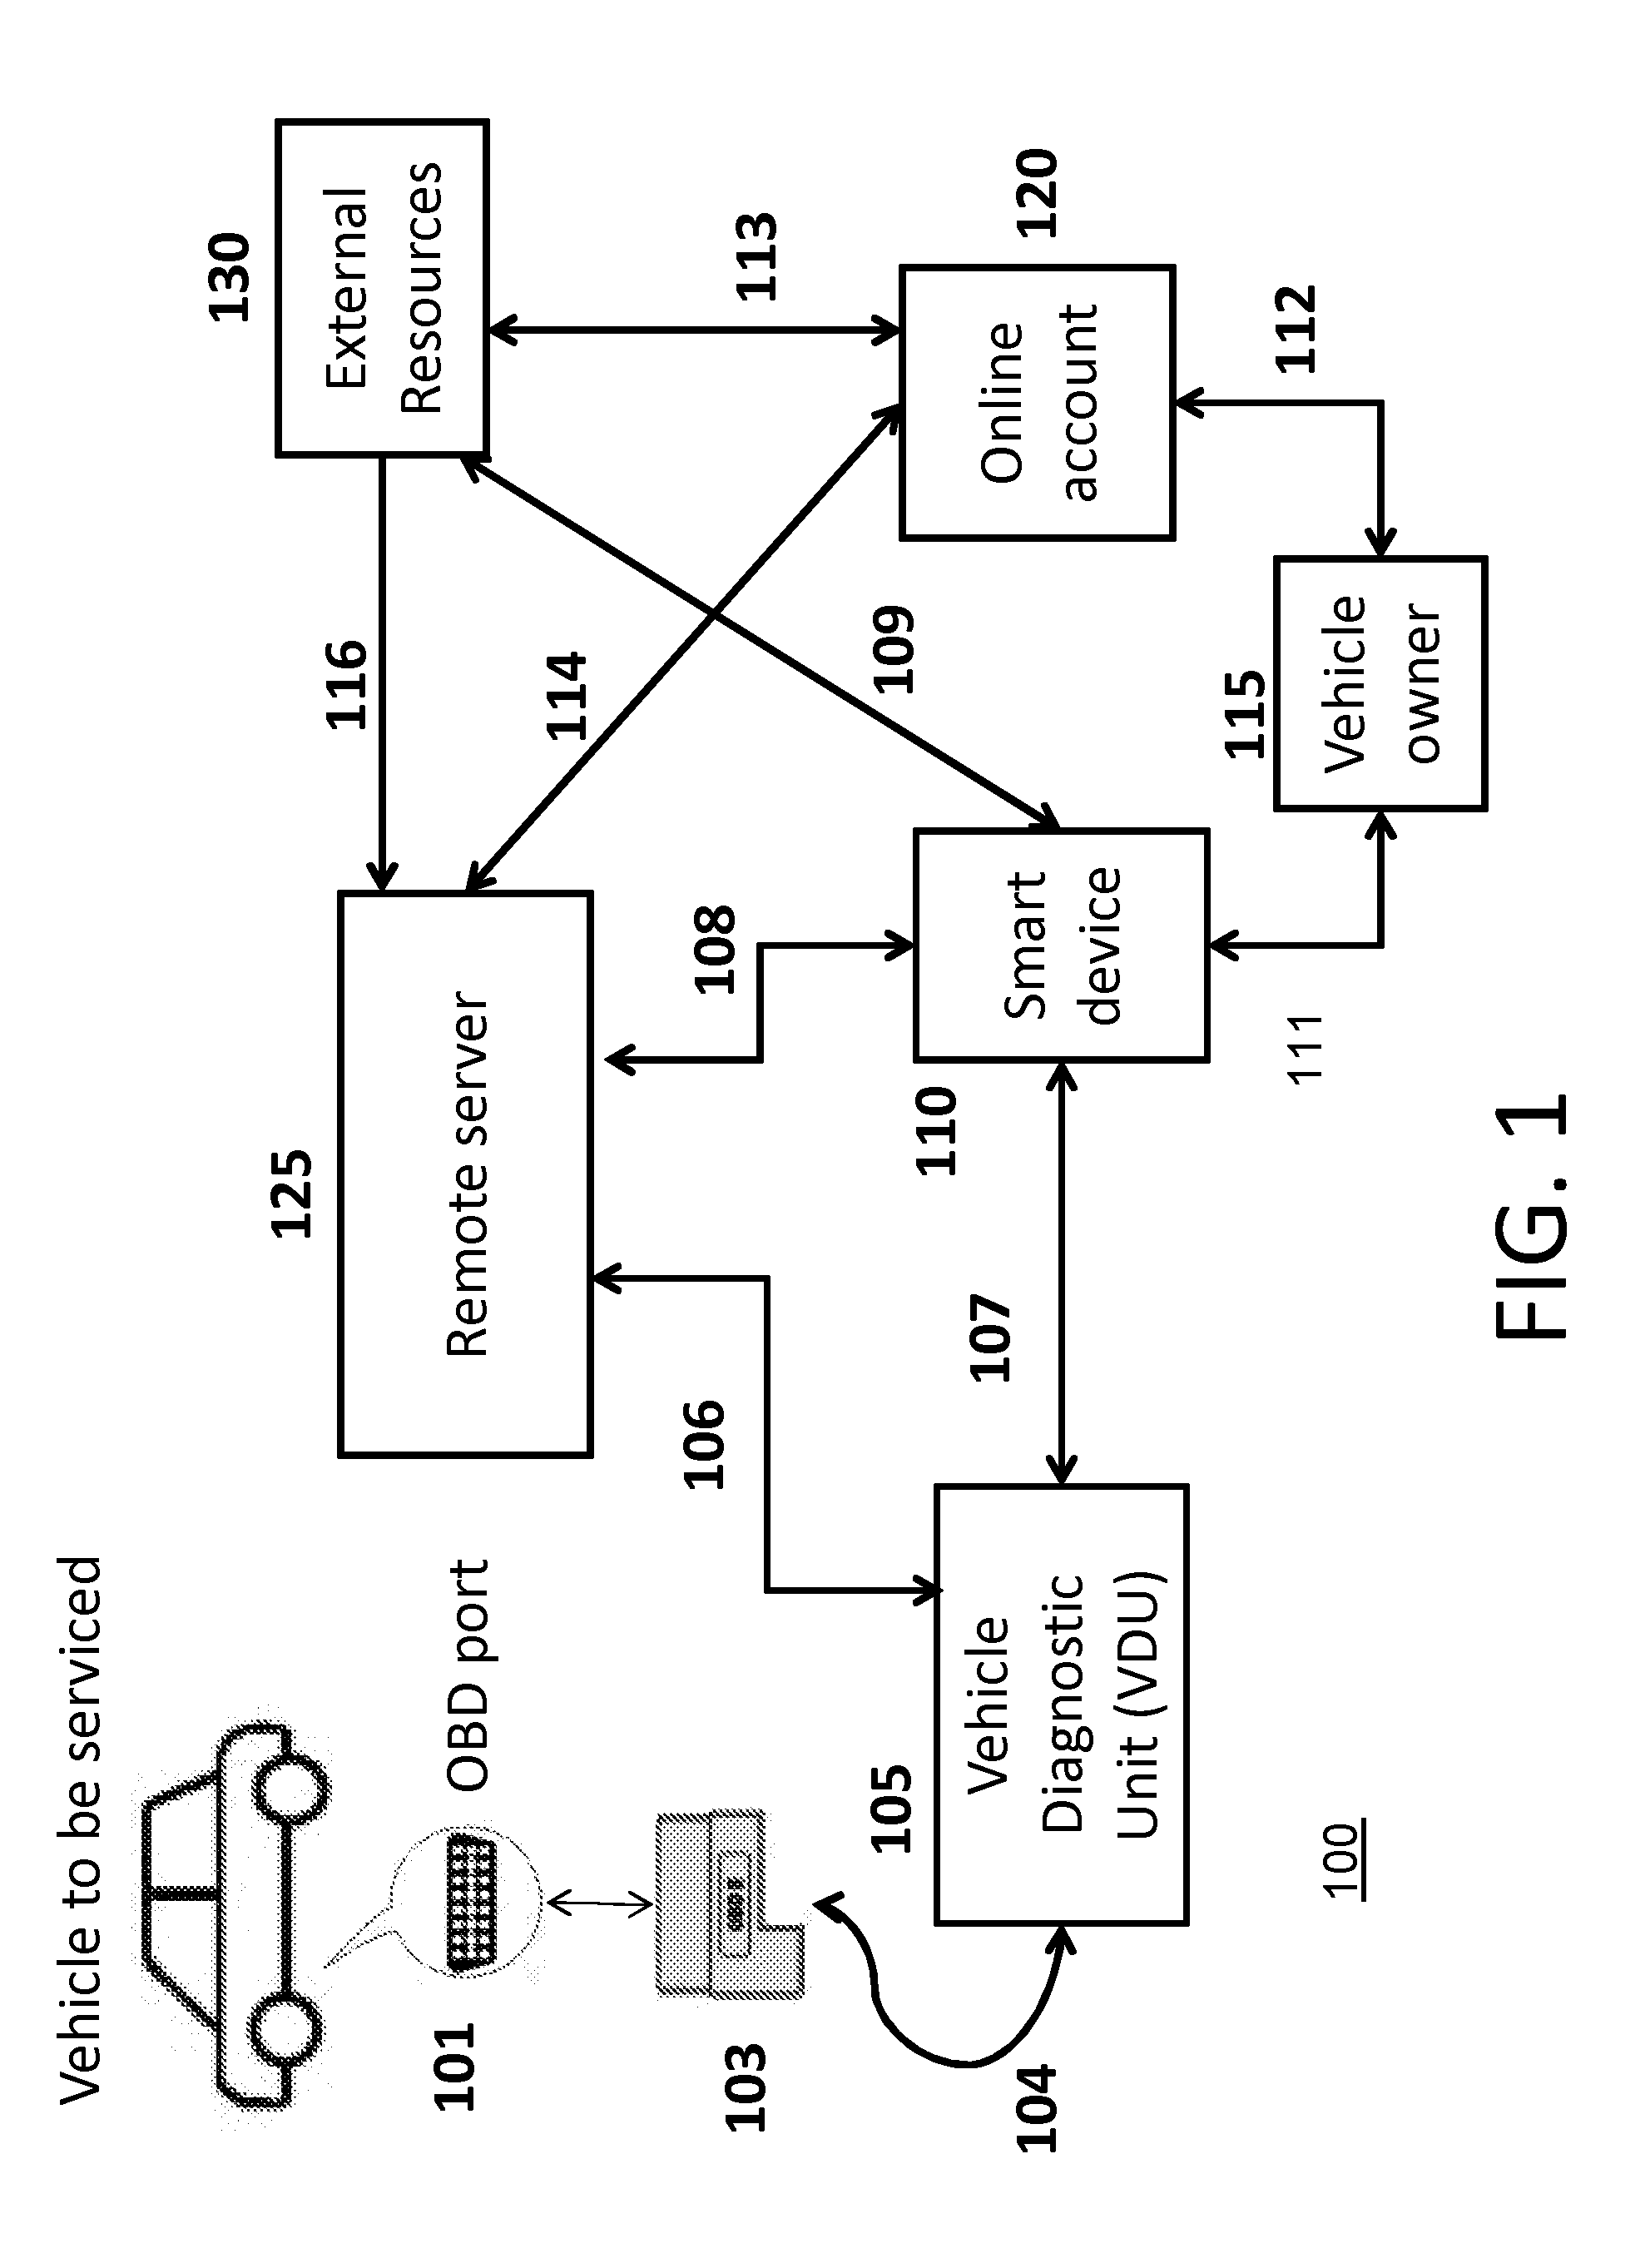 System, device and method of remote vehicle diagnostics based service for vehicle owners